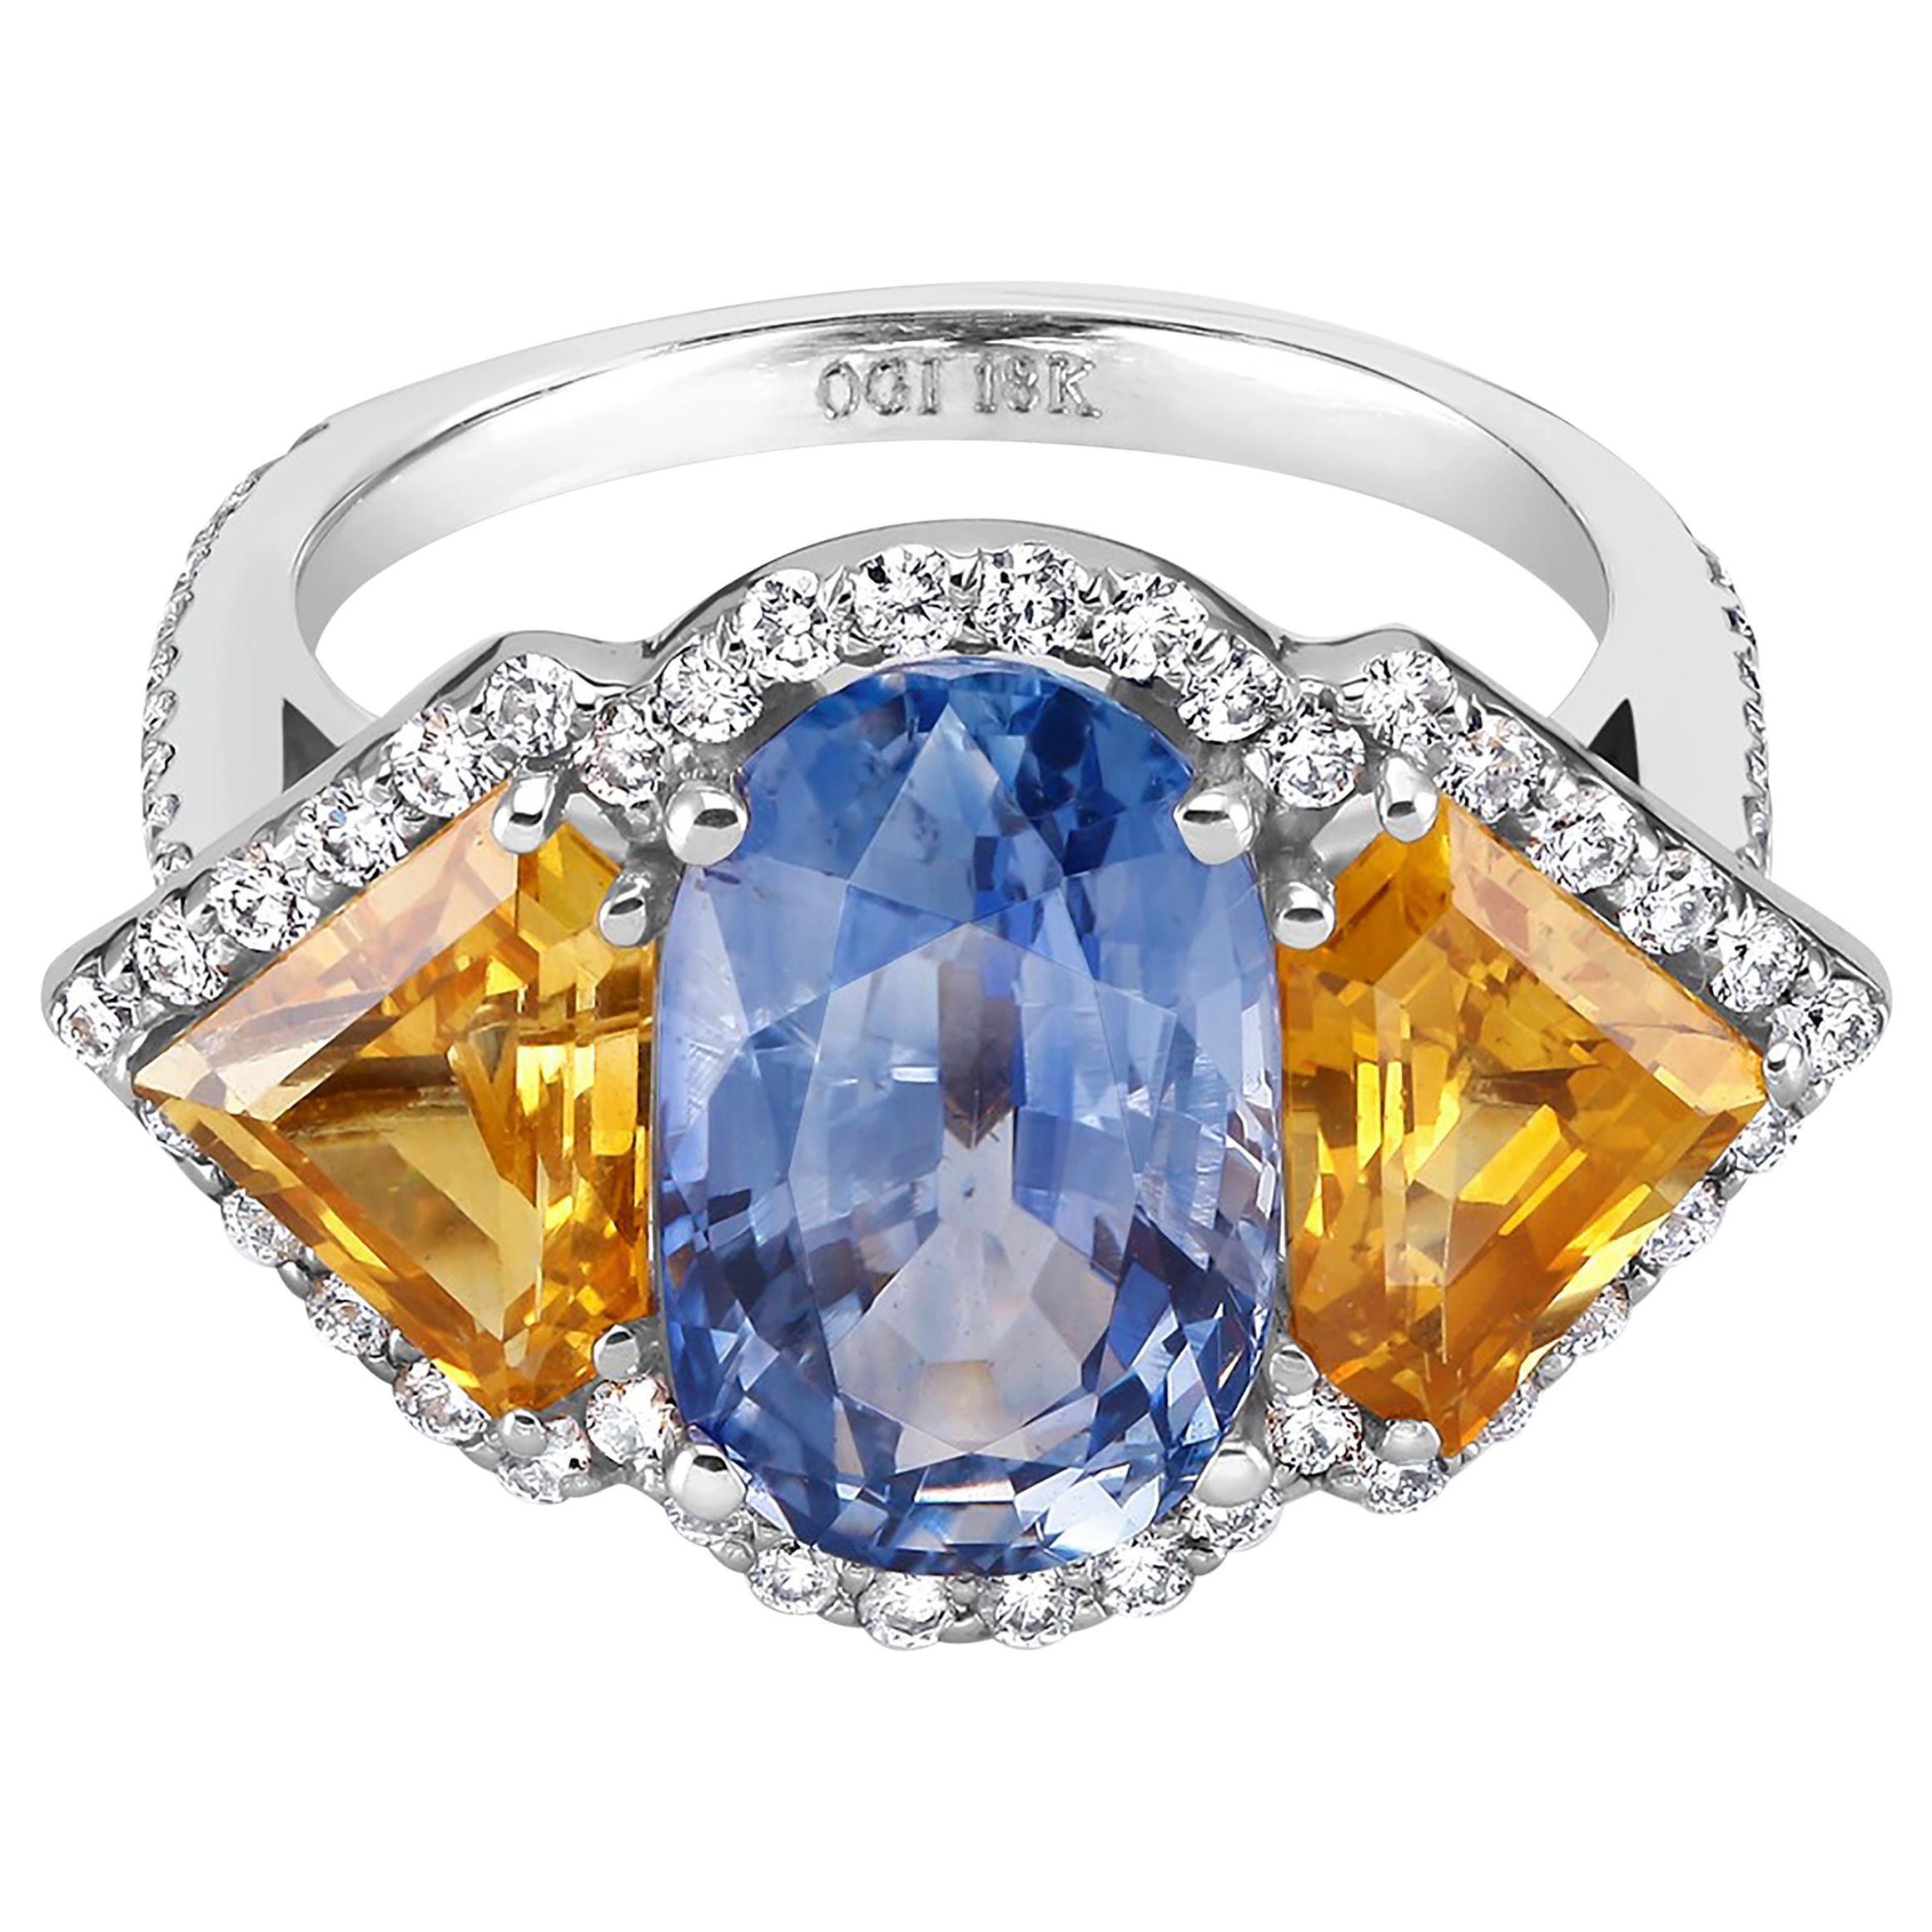 Ceylon Blue and Yellow Sapphire Diamond Gold Cocktail Ring Weighing 8.26 Carat